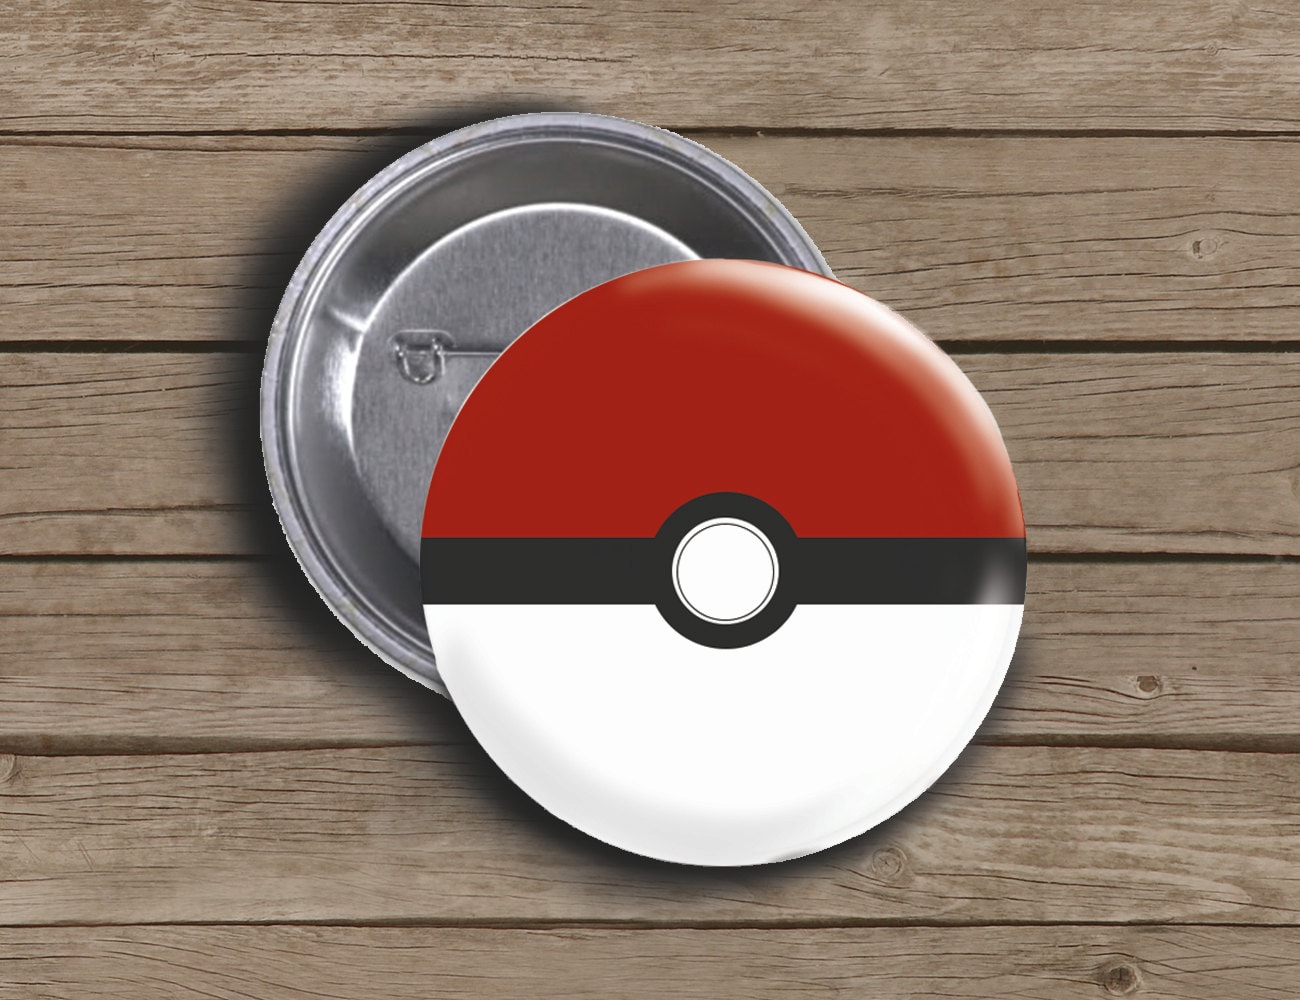 Funny Buttons And Stuff: Pokeball Pinback Button - Pokéball on 1.5 inch ...